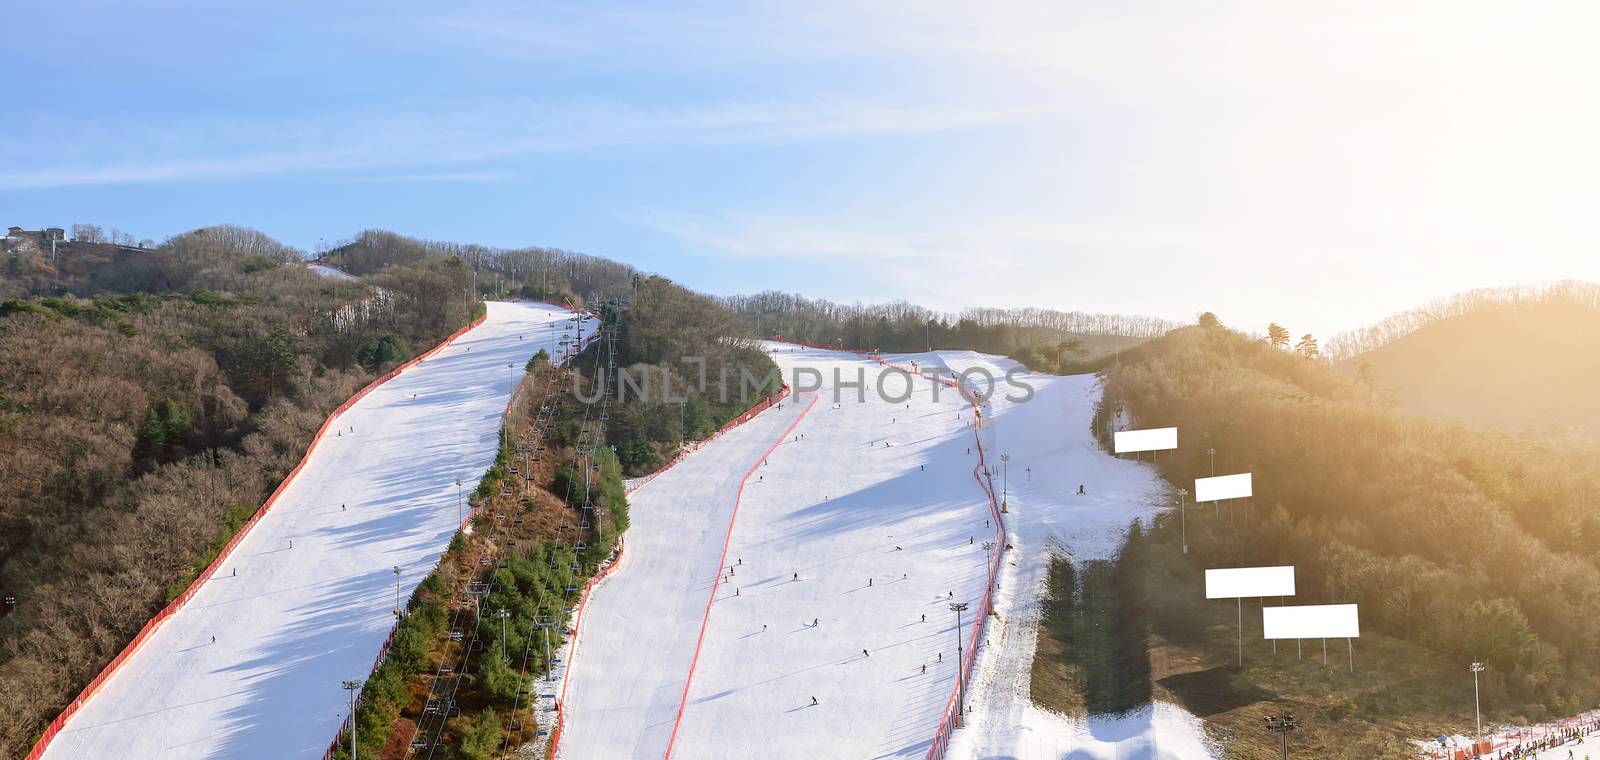 The skier was skiing down the hill.